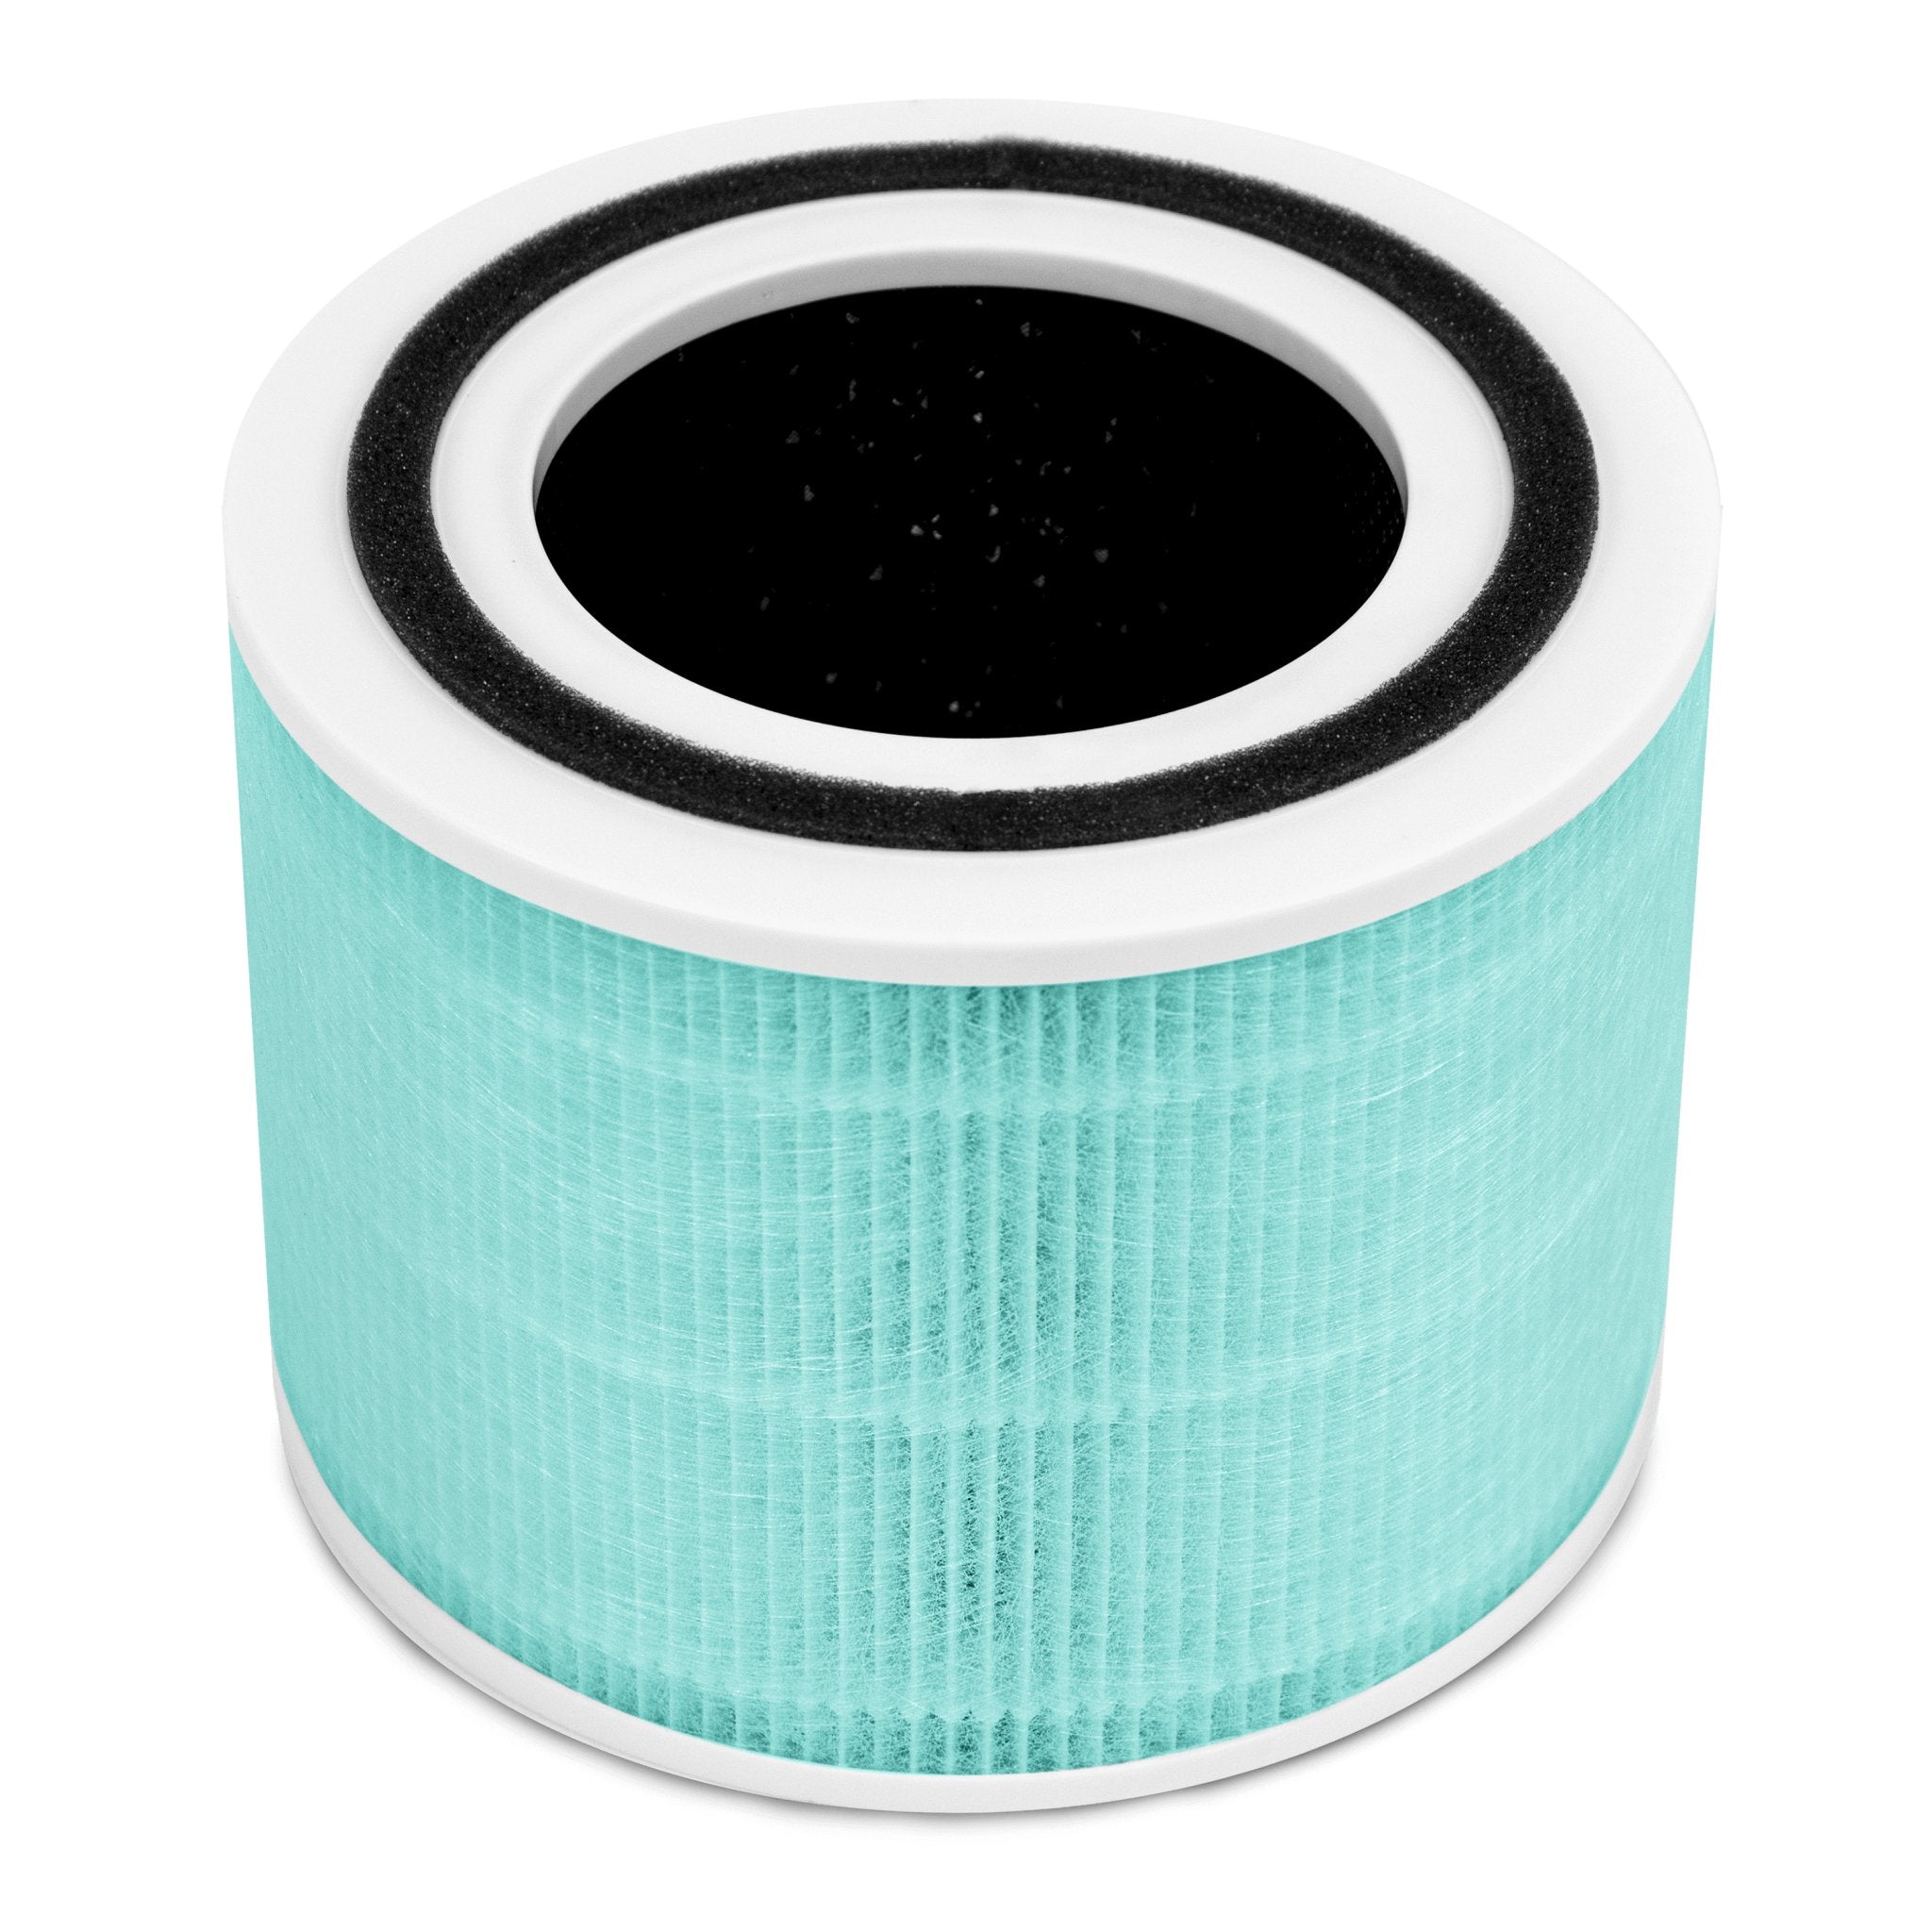 laukowind replacement filter core 300, compatible with levoit air purifier core  300 and core 300s, core 300-rf, laukowind replacement f